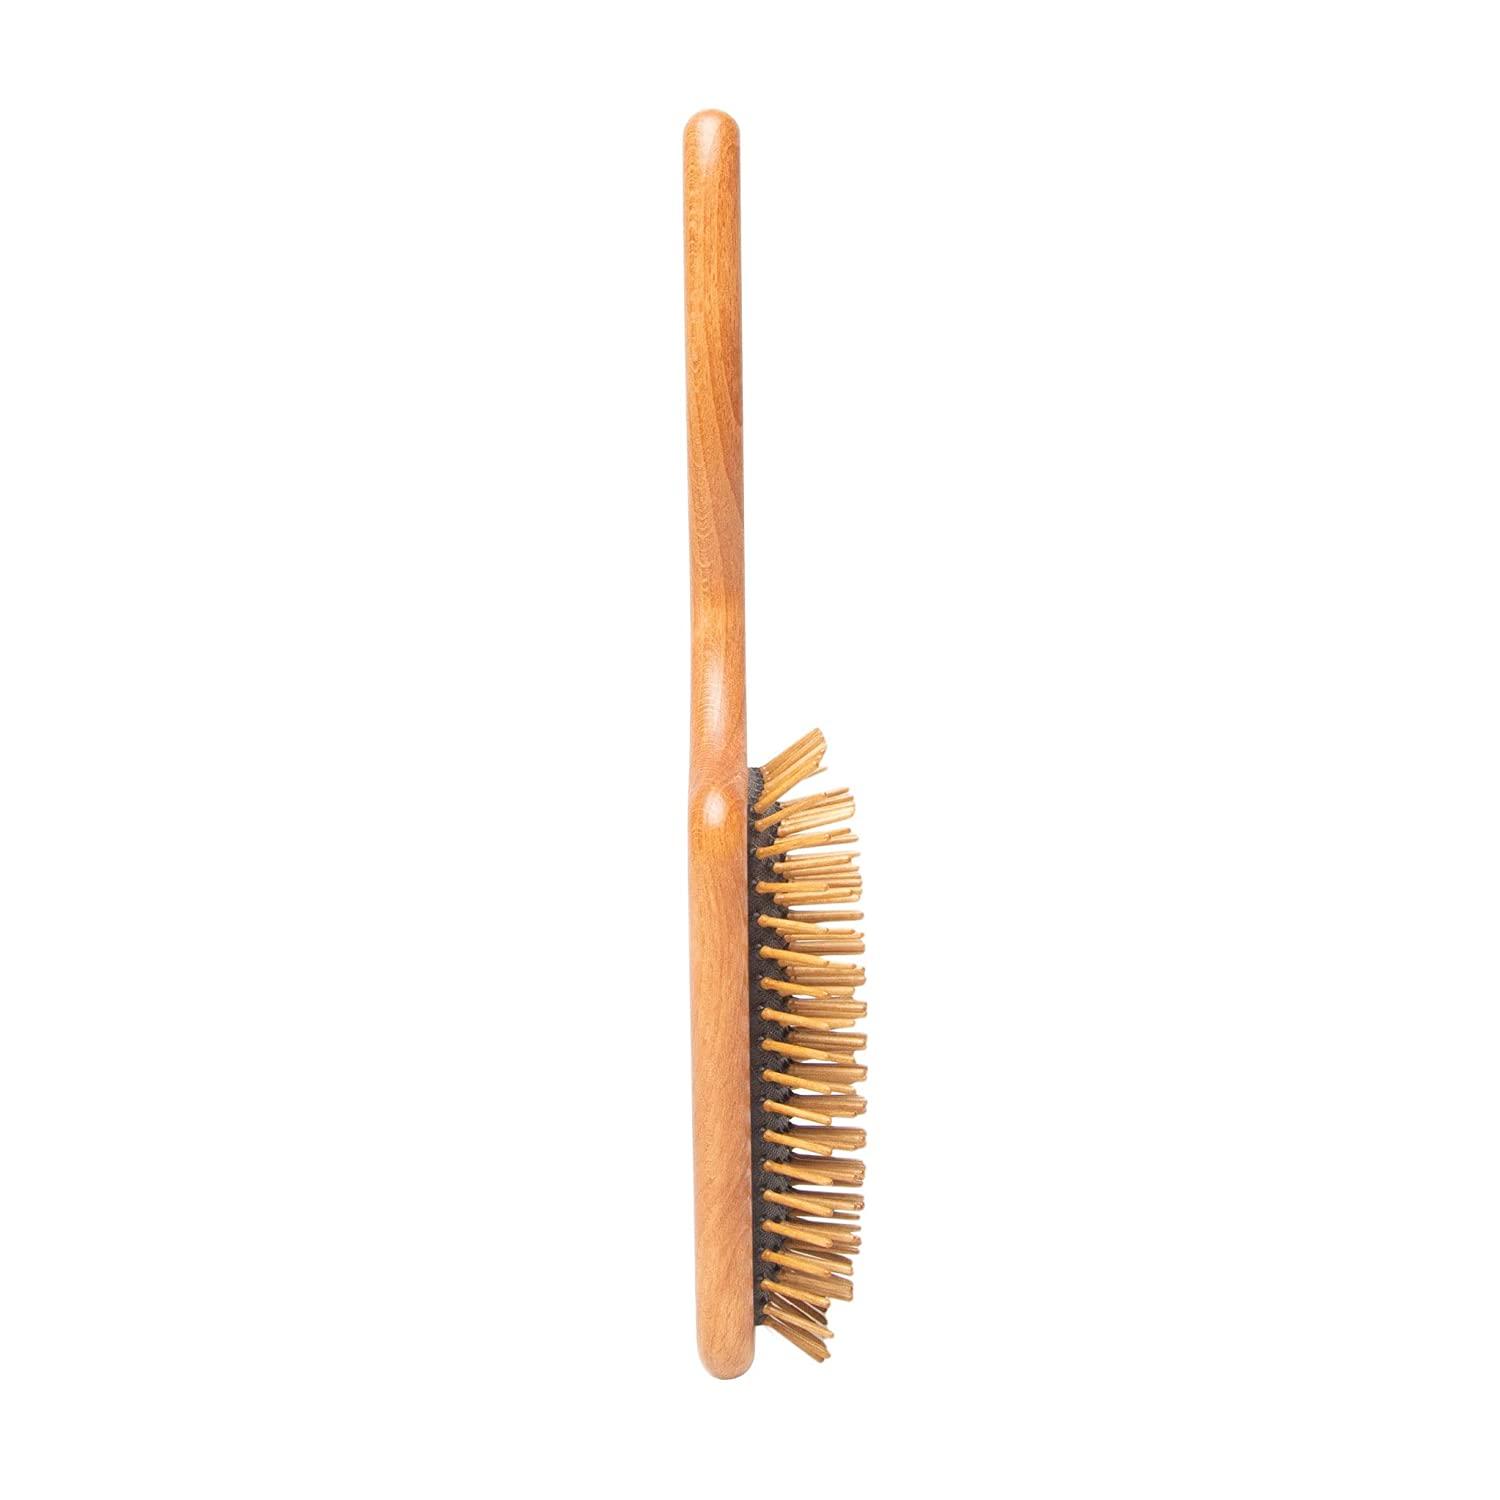 Made in Germany - SUSTAINABLE SHASH Wooden Paddle Brush, Gently Detangles,  Styles, Smooths and Conditions Hair, Minimizes Frizz and Breakage, Safe for  All Hair Types, Wet or Dry, Eco-Sourced Wood, Wooden Bristles.